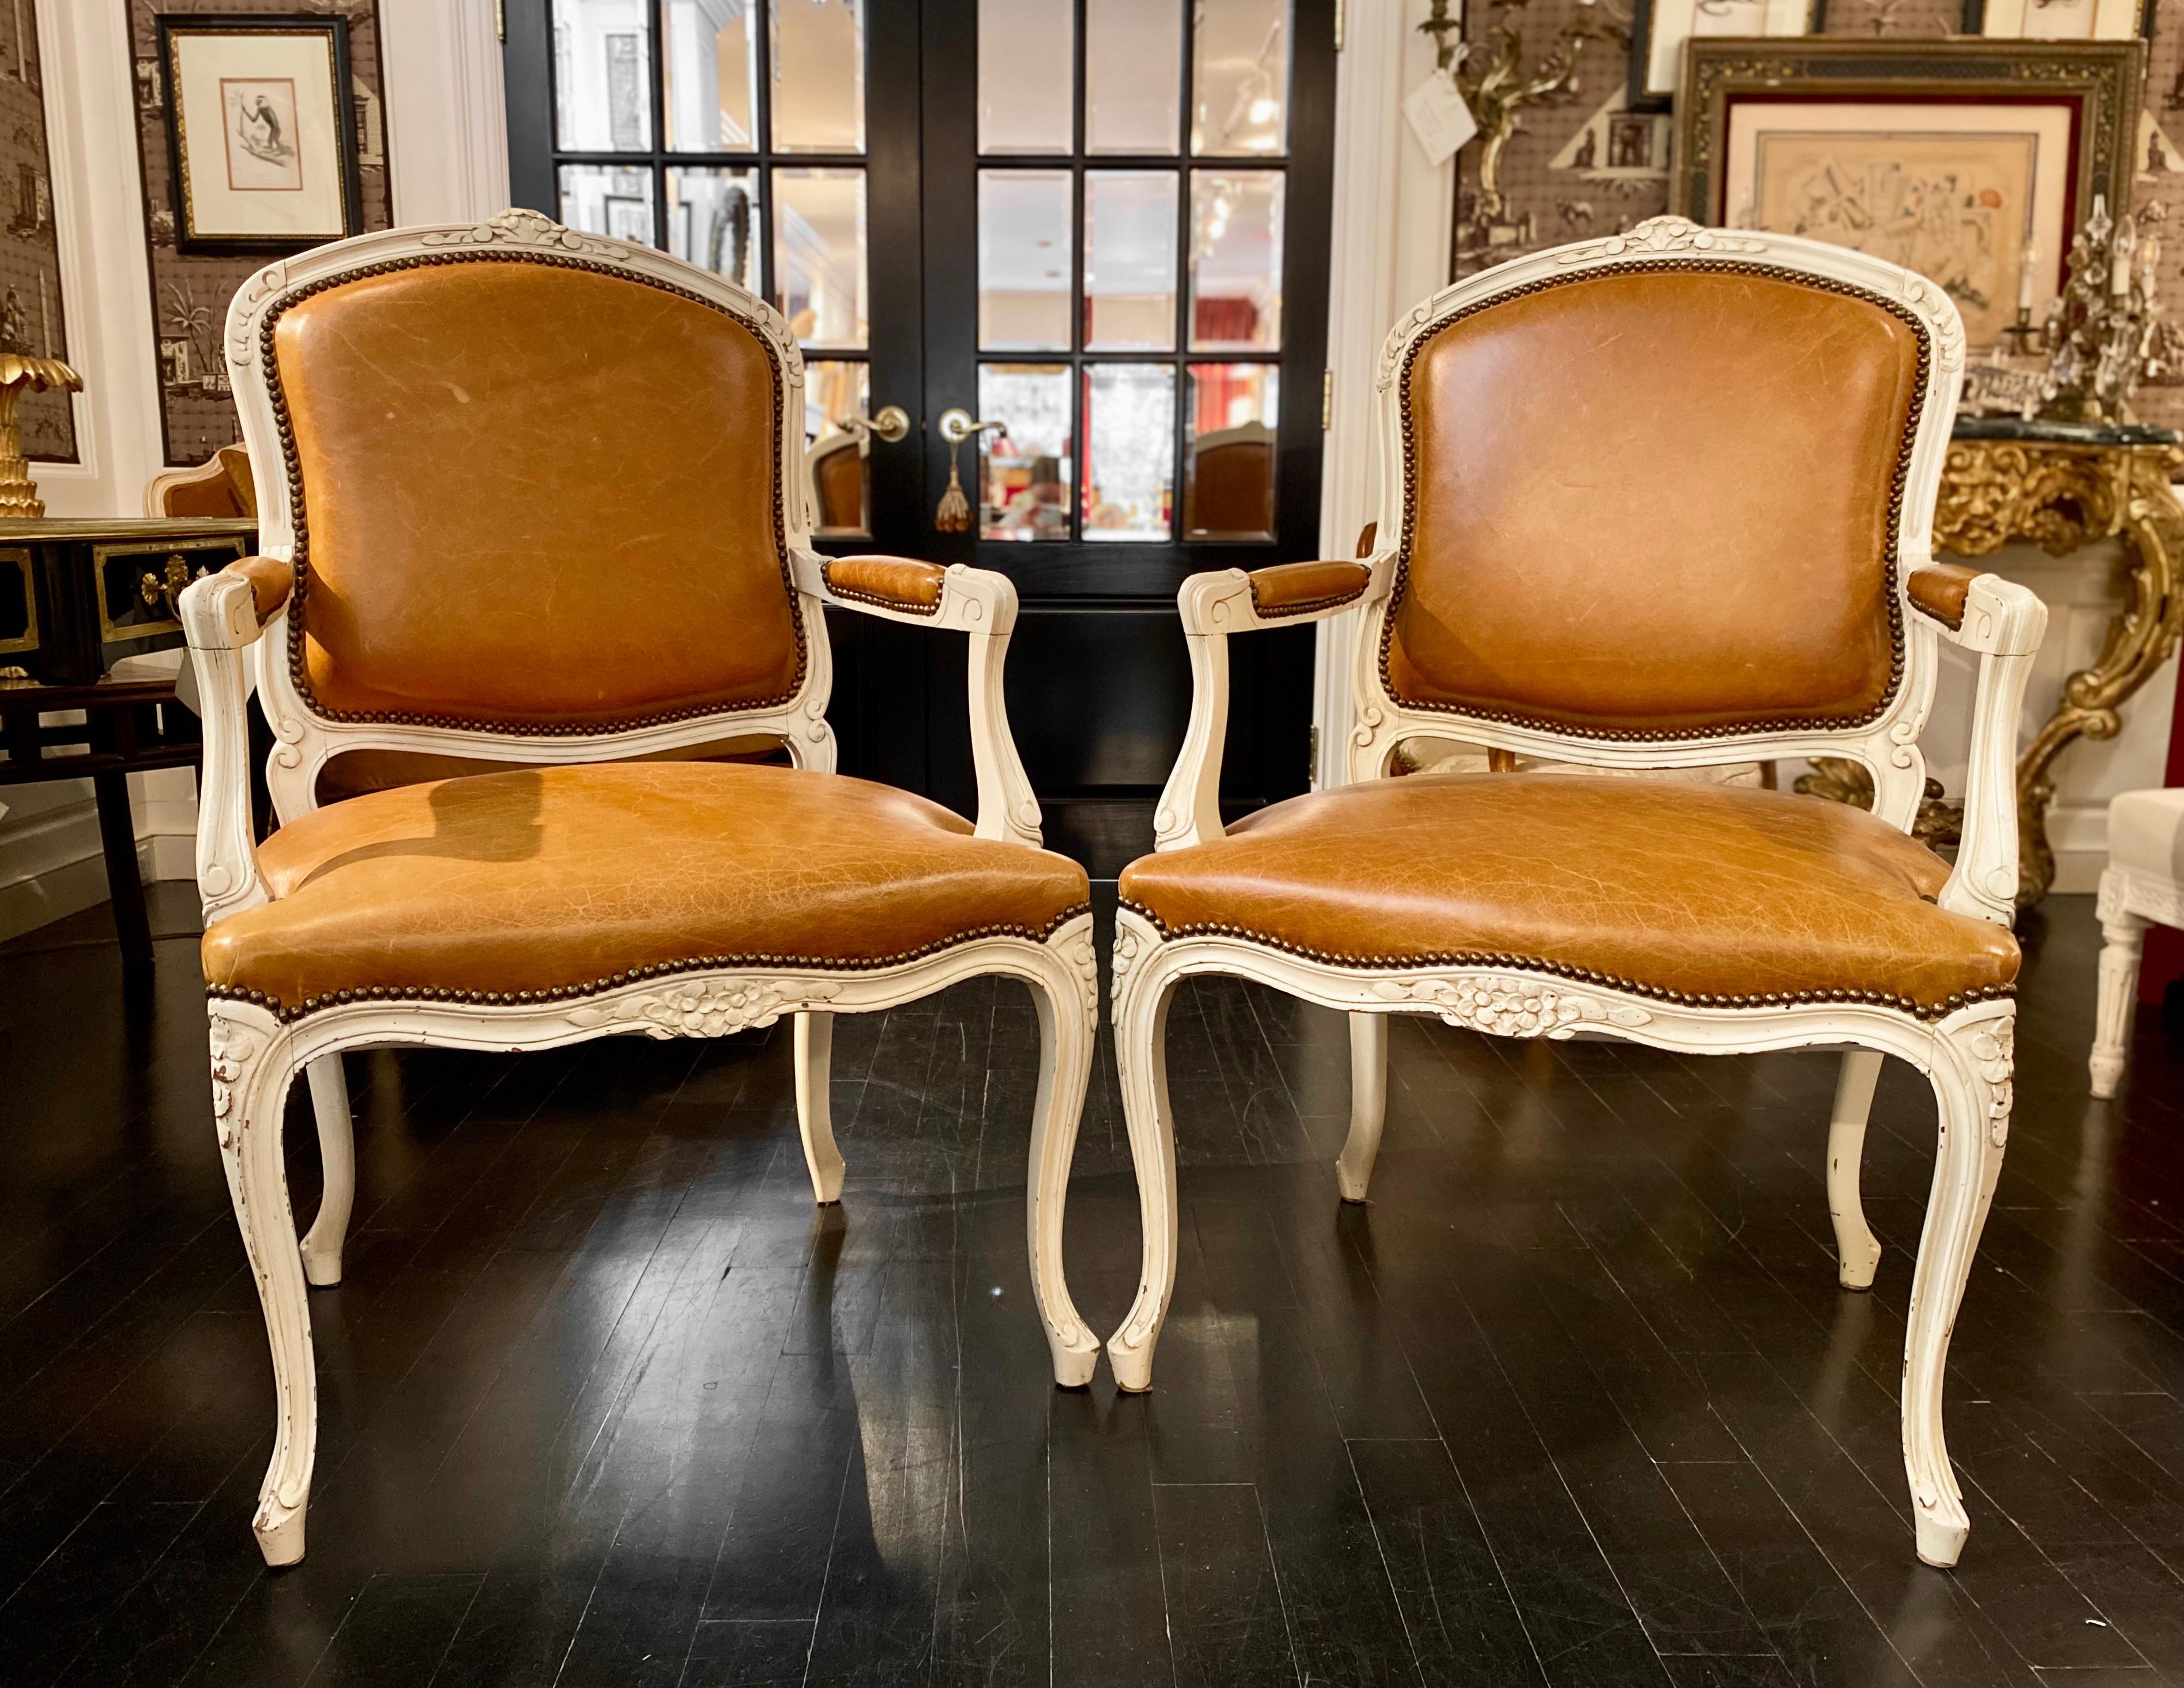 Pair of Armchairs, Louis XV Montespan style, newly upholstered in soft caramel/tan leather.